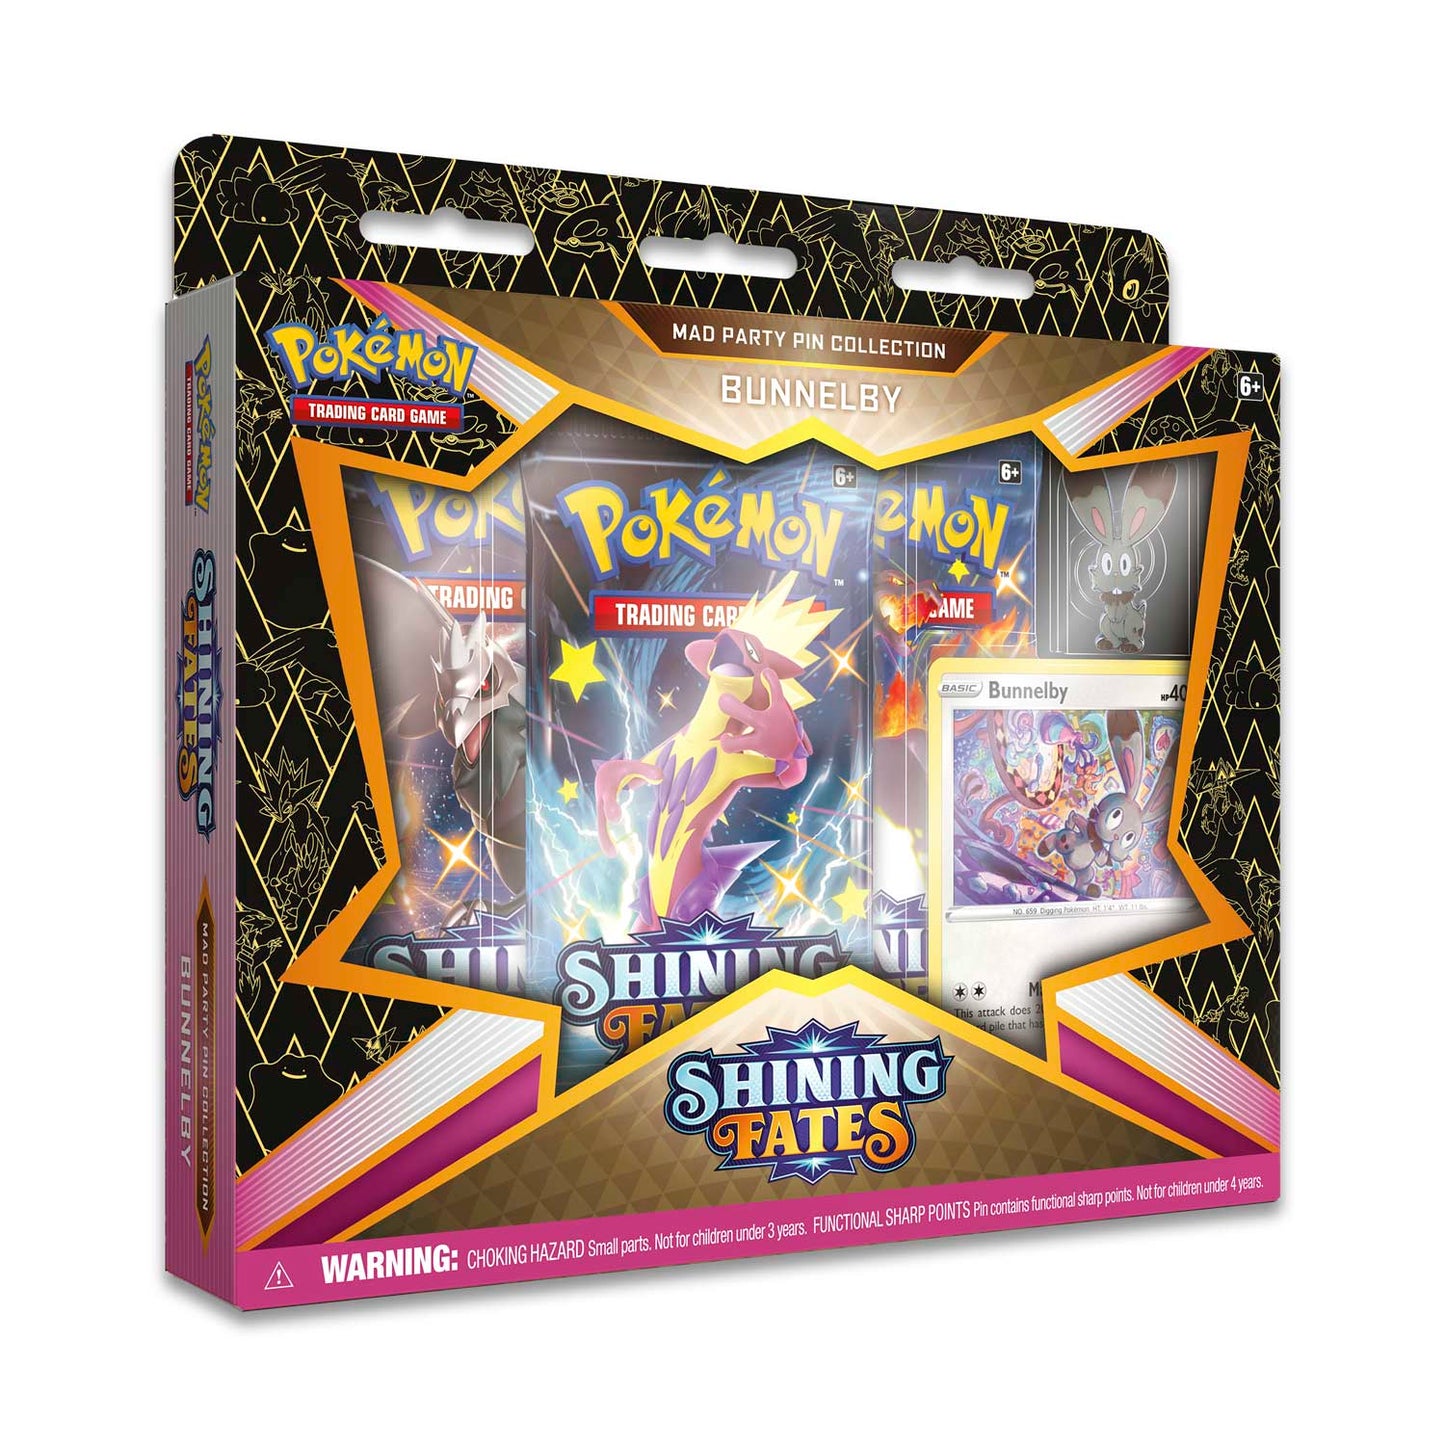 Pokémon TCG: Shining Fates Mad Party Pin Collection (Bunnelby) Super Anime Store 